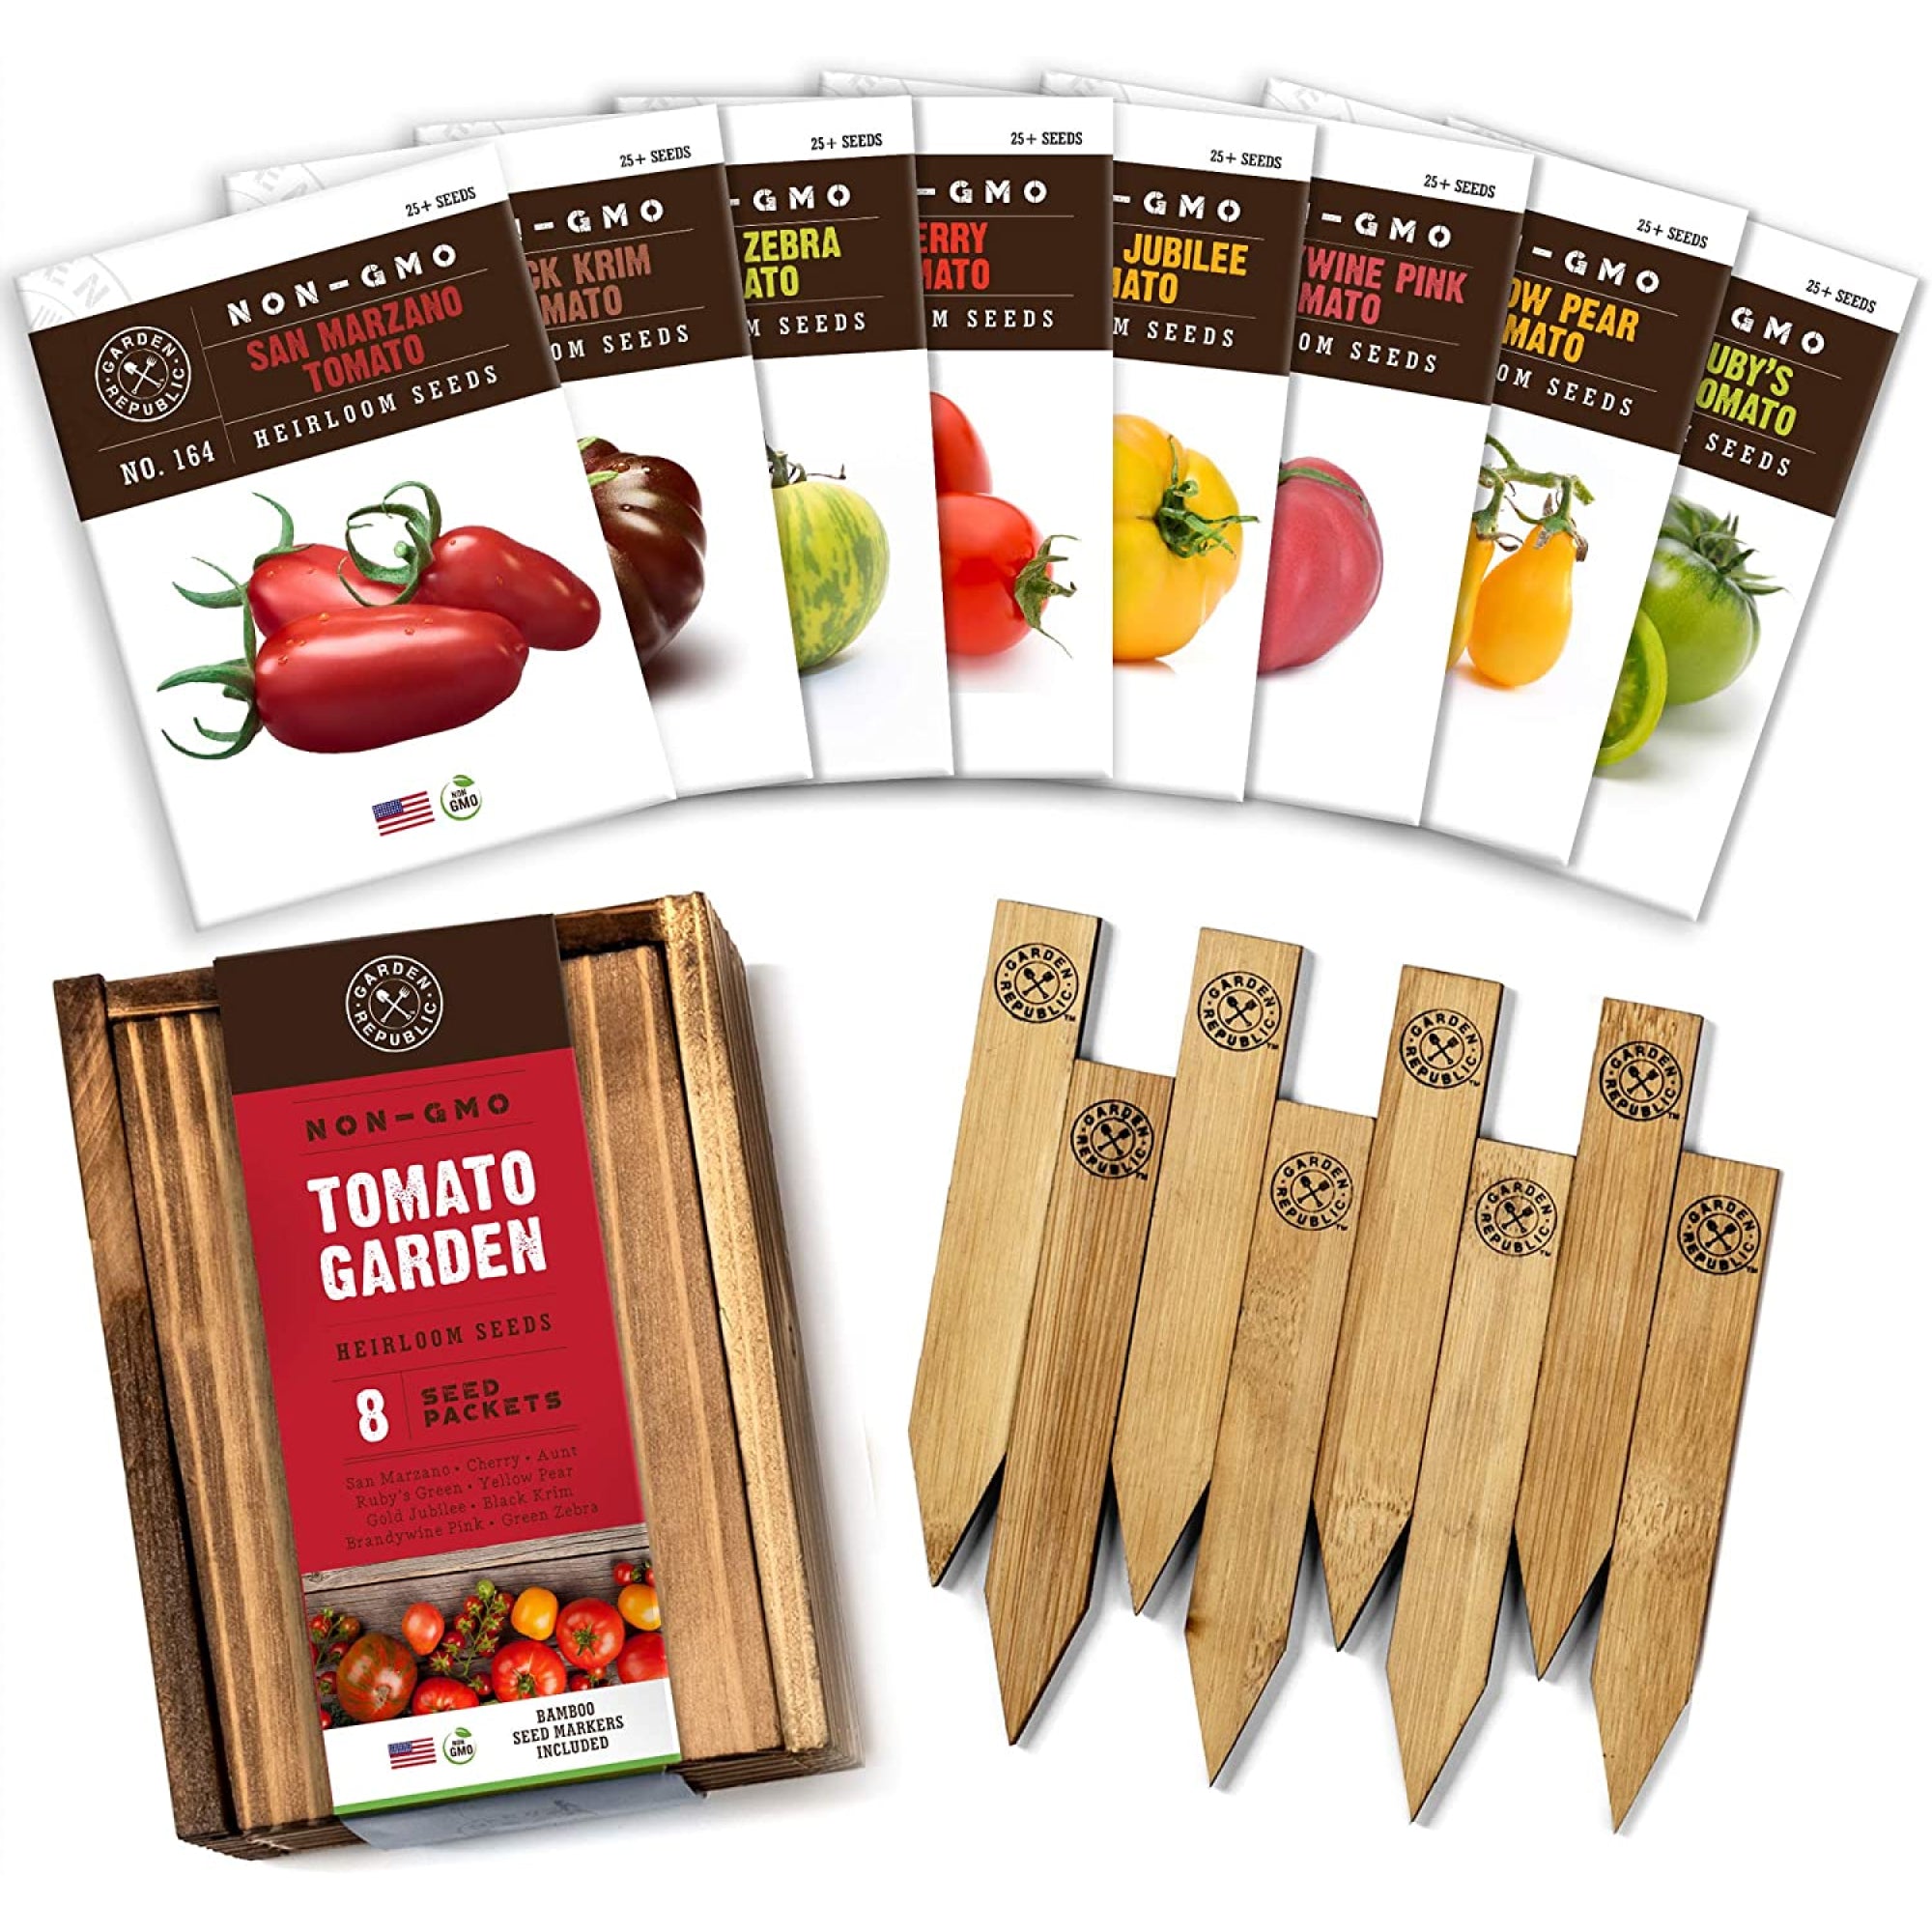 Tomato, Jet Star Tomato Seeds 25 Seed Pack, USA Product. JACOBS LADDER ENT.  (25)